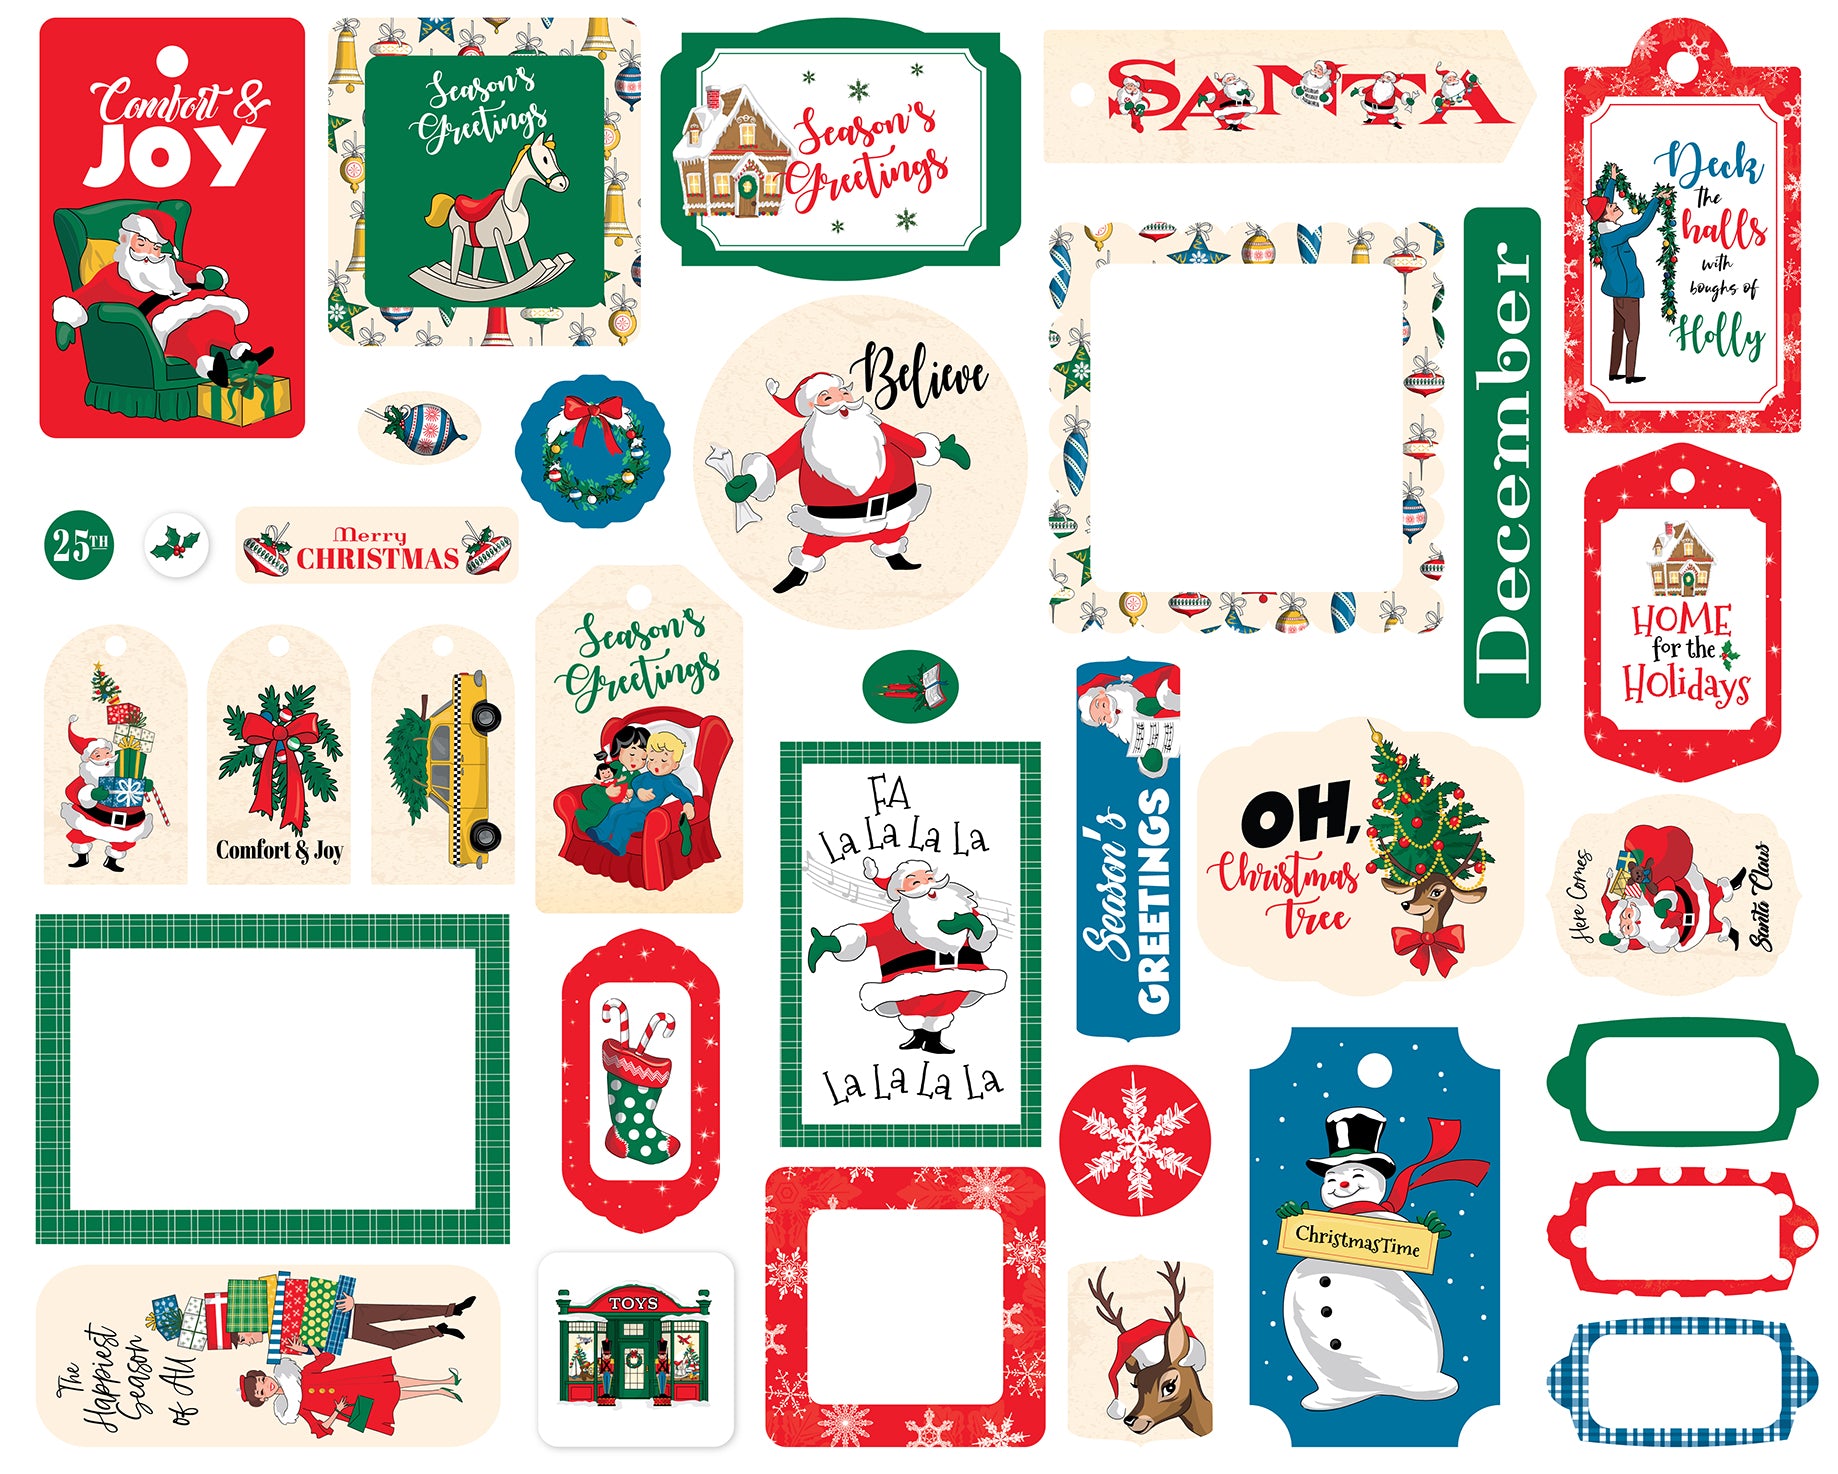 Season's Greetings Collection Scrapbook Frames & Tags by Carta Bella